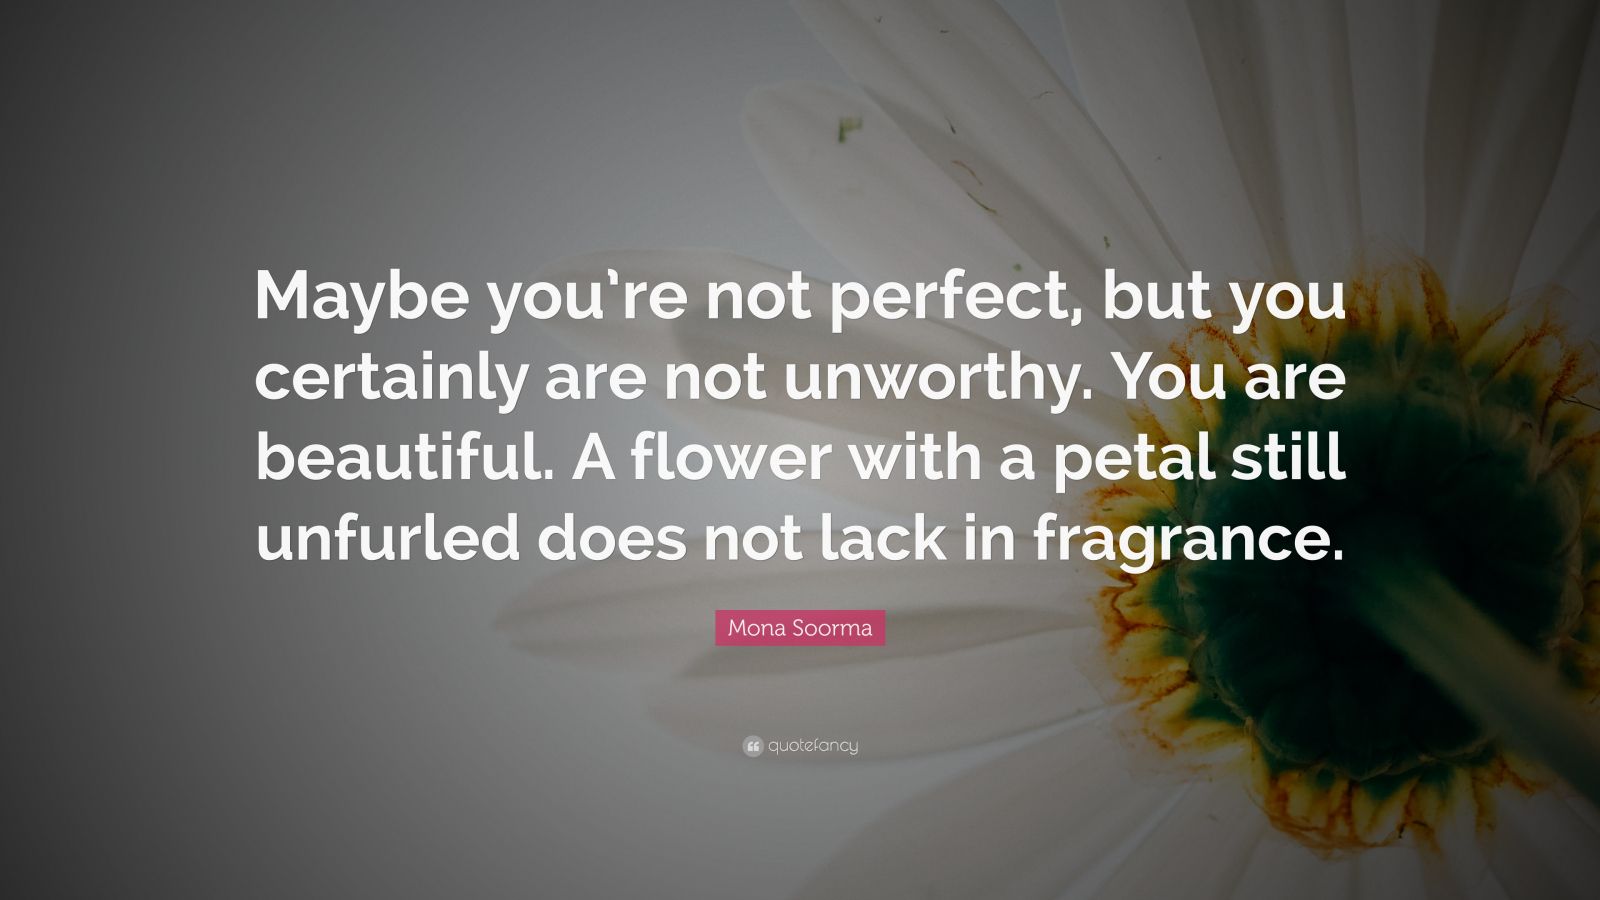 Mona Soorma Quote: “Maybe you're not perfect, but you certainly are not  unworthy. You are beautiful. A flower with a petal still unfurled do”